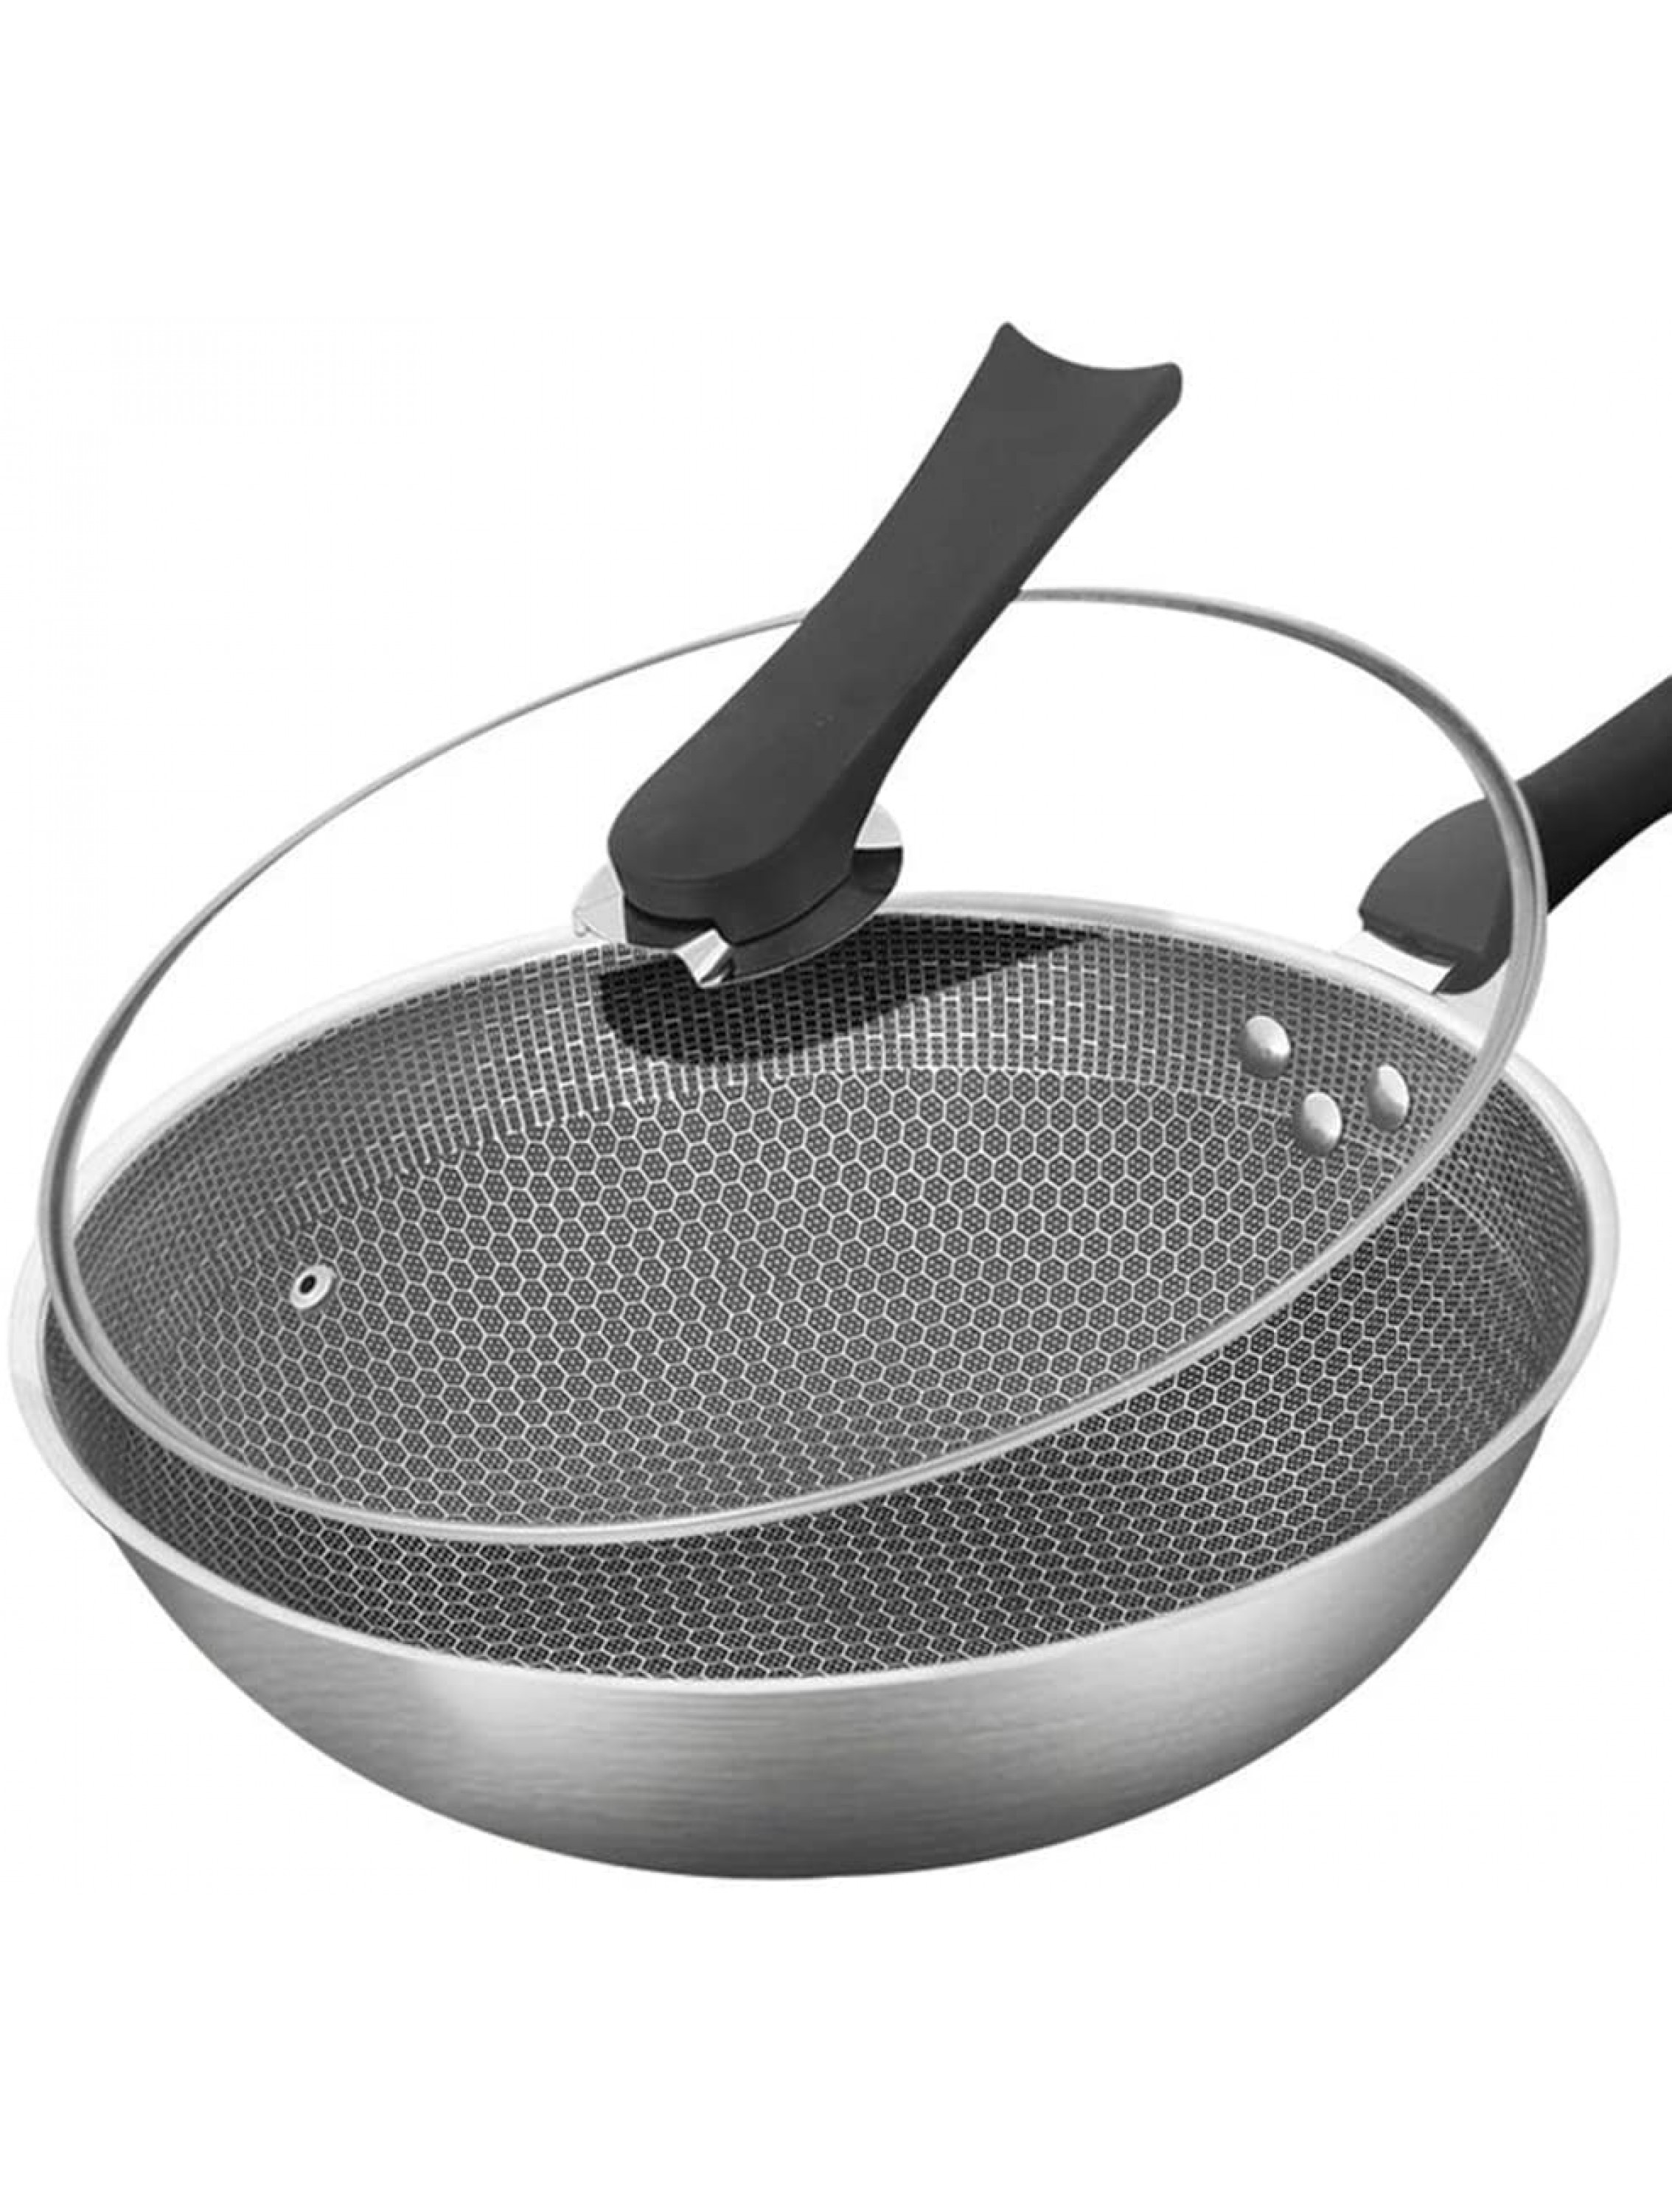 XMcKJ Stainless Steel Wok a Non-Stick pan with a Glass lid and Anti-scalding Silicone Handle for use in a Fume-Free Frying pan in Family Restaurants 32cm 12in - BWJNFAZTI